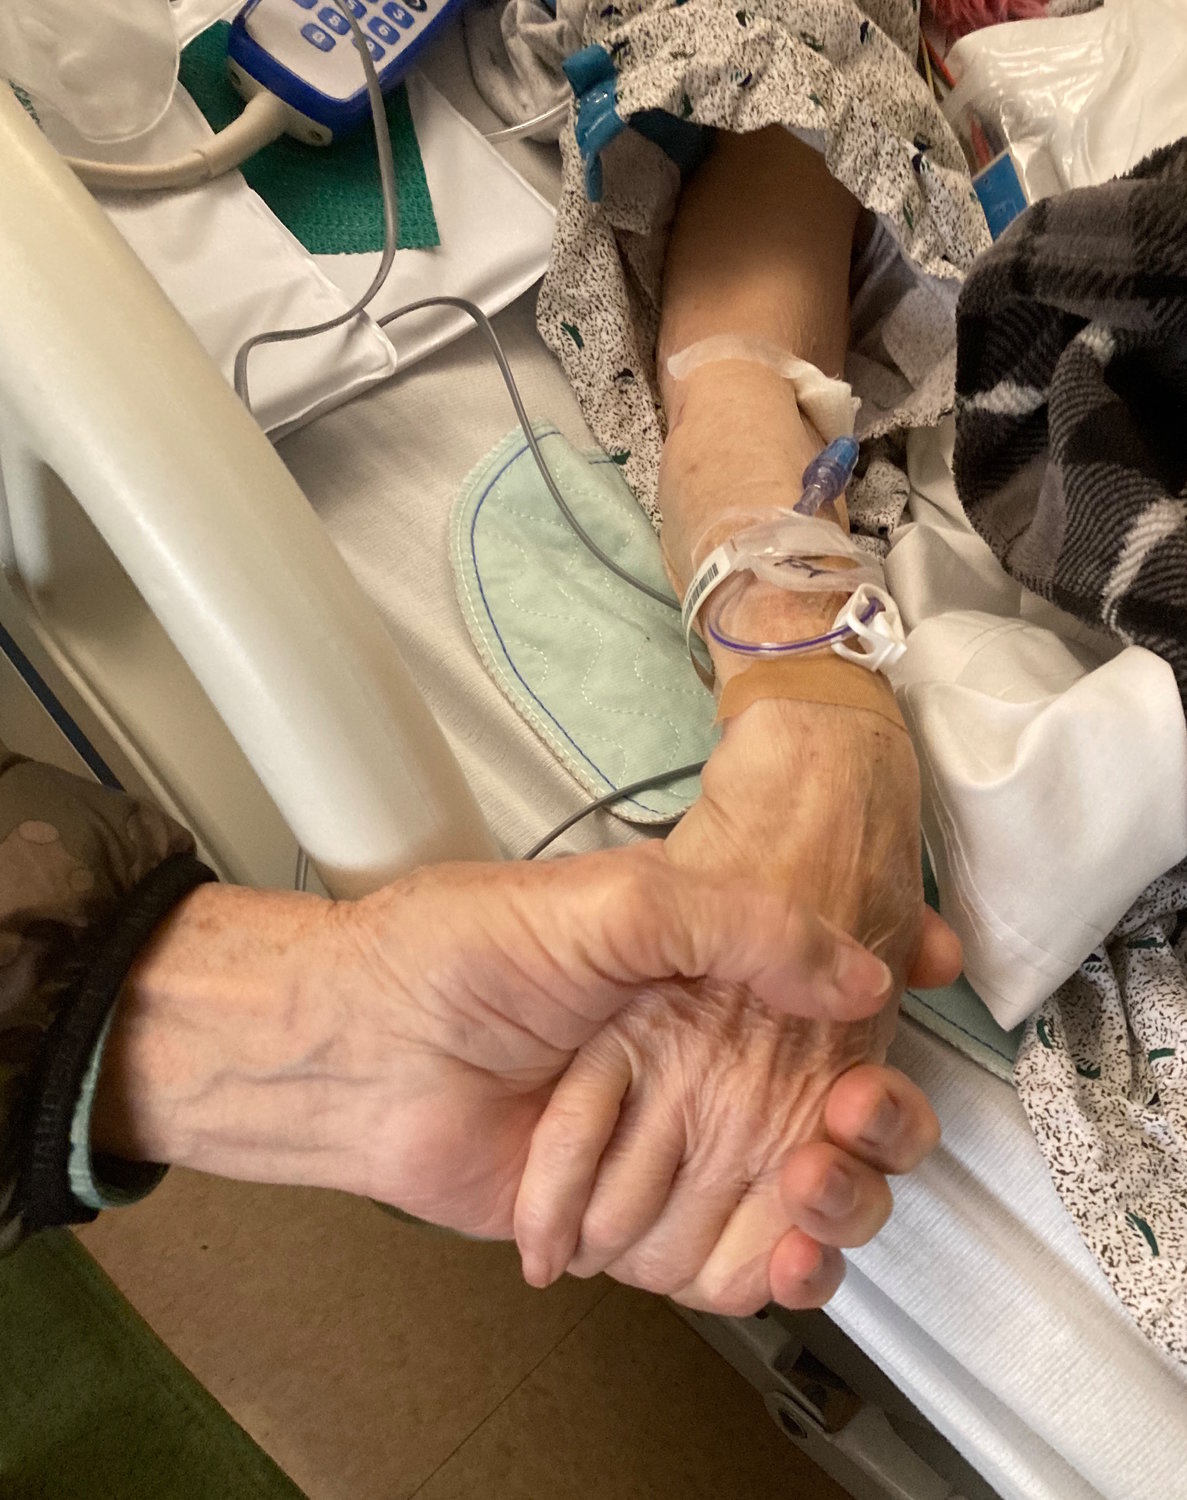 My parents join hands to comfort each other in this current stage of their long journey together. Mom has been discharged from the hospital into a care facility and Dad remains by her side.